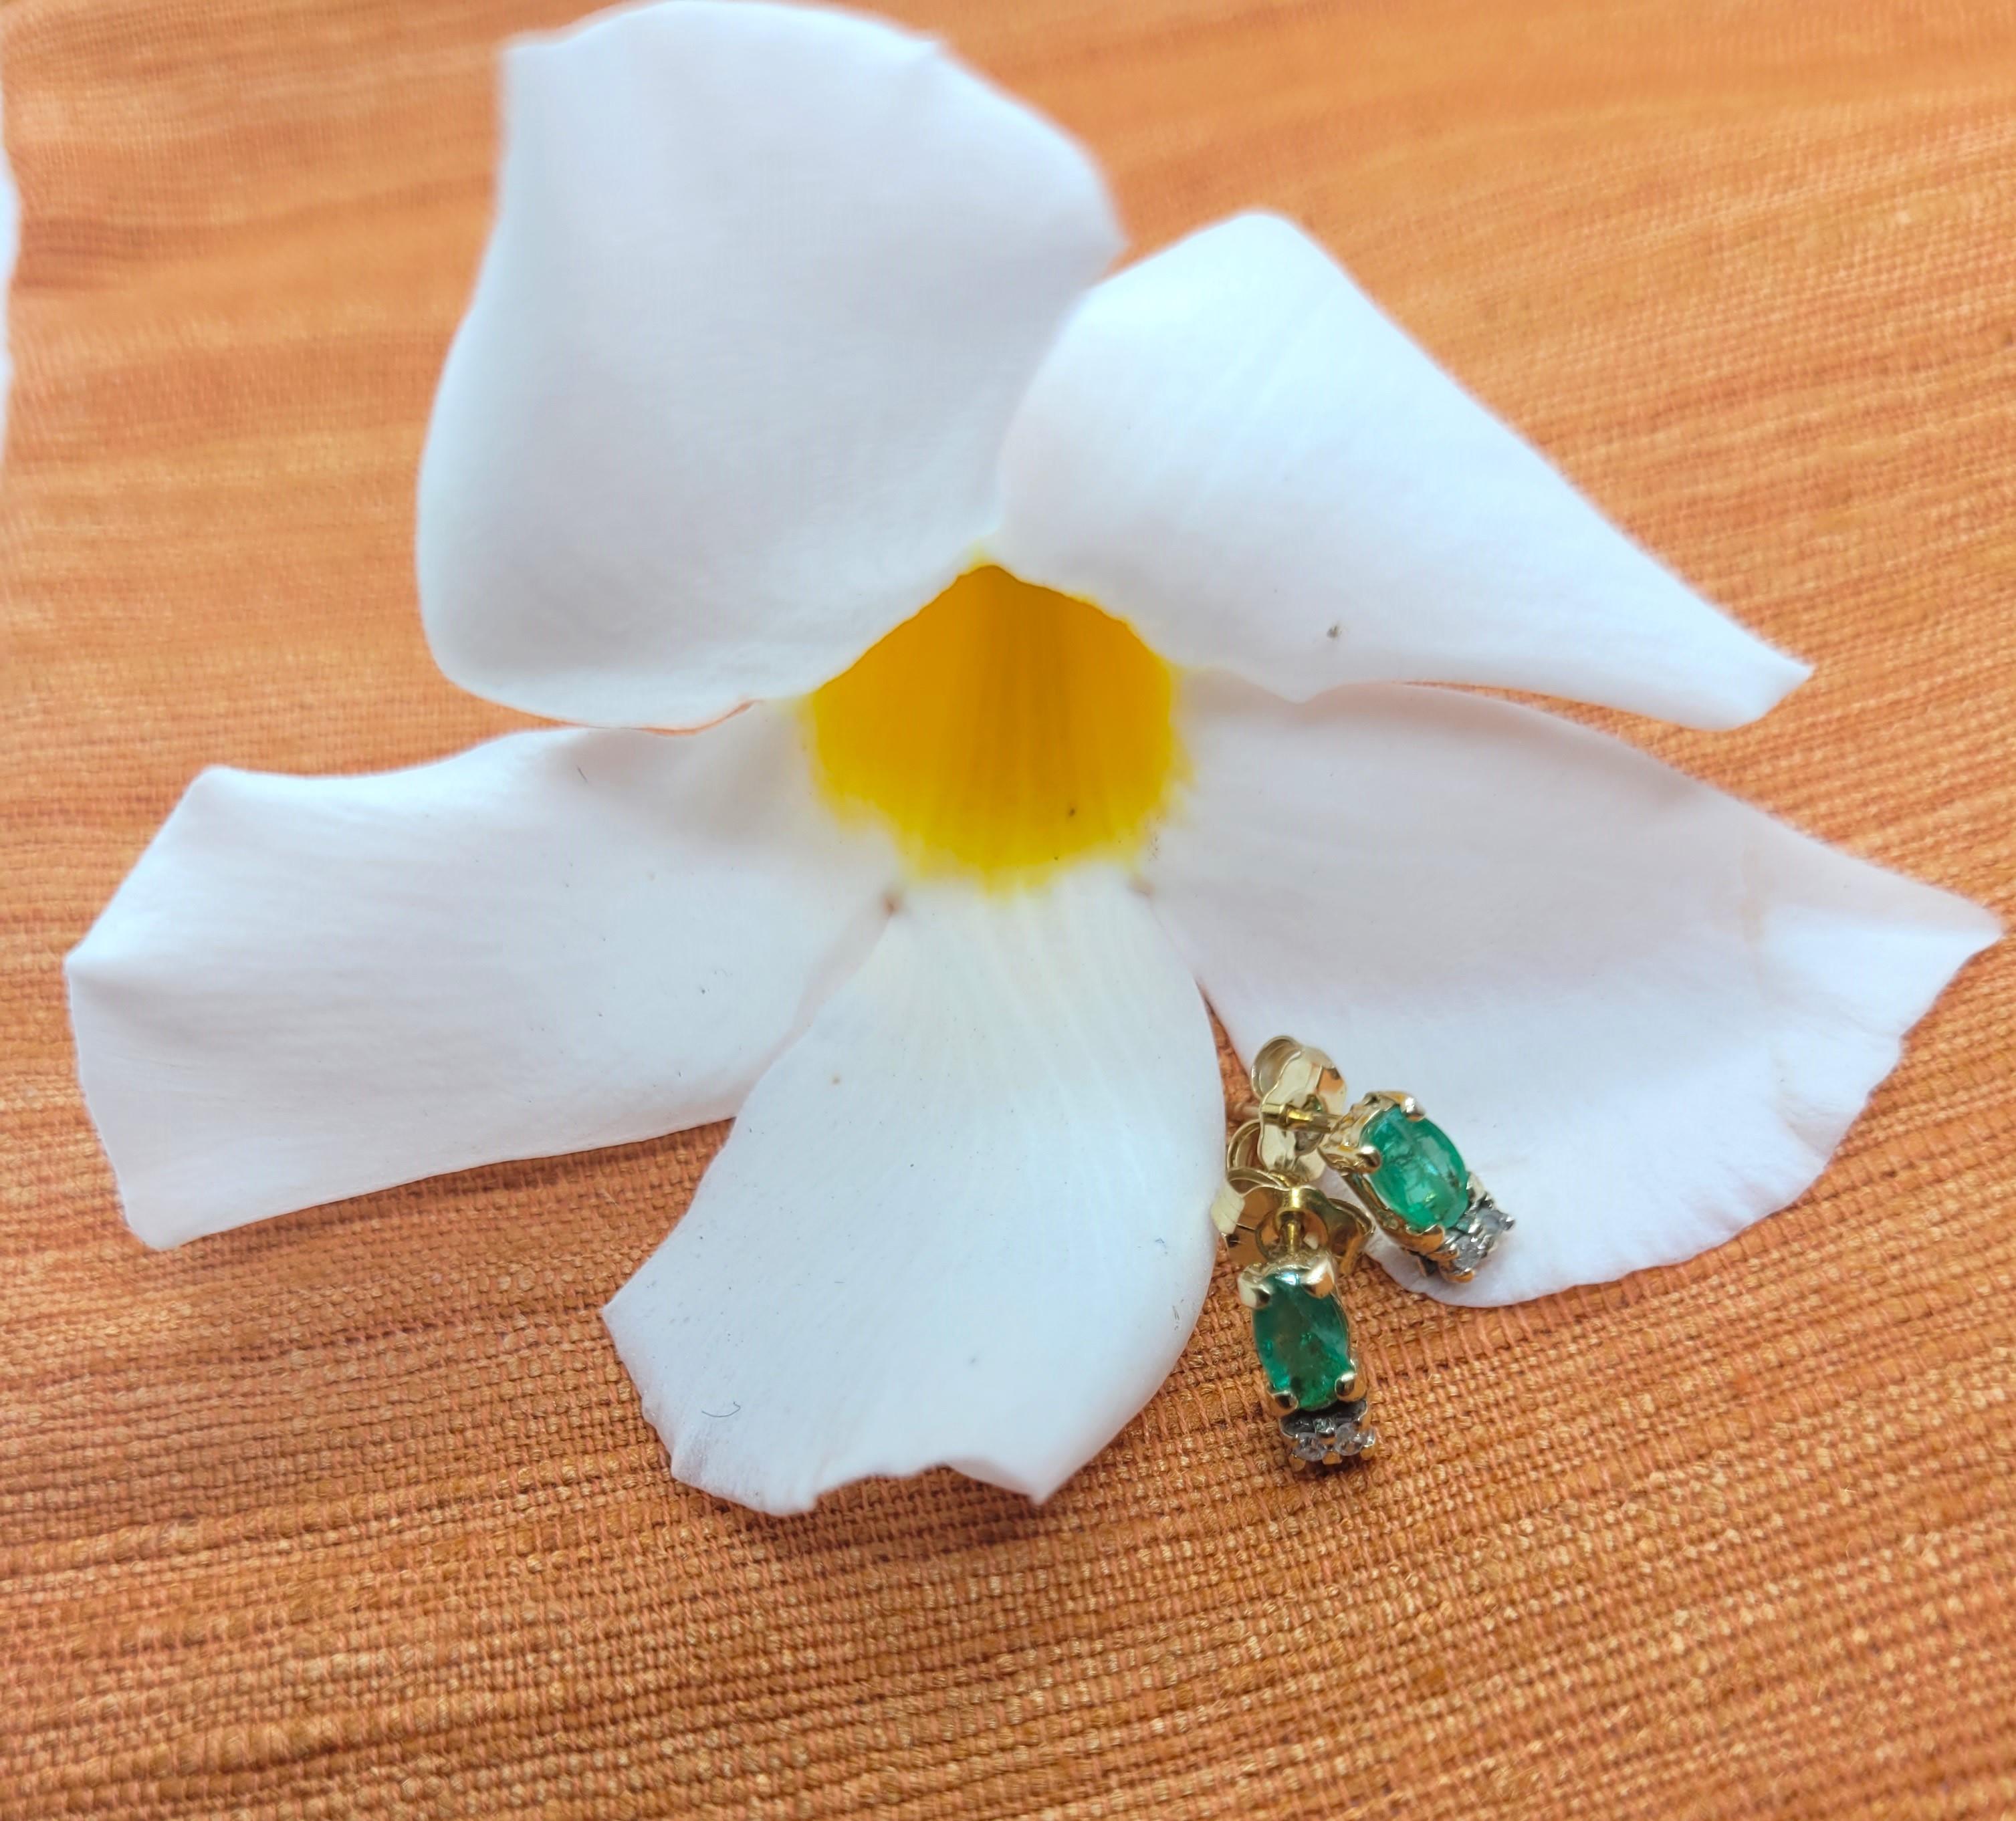 14kt Yellow Gold Oval Emerald Single Cut Diamond Earrings Friction In Good Condition For Sale In Rancho Santa Fe, CA